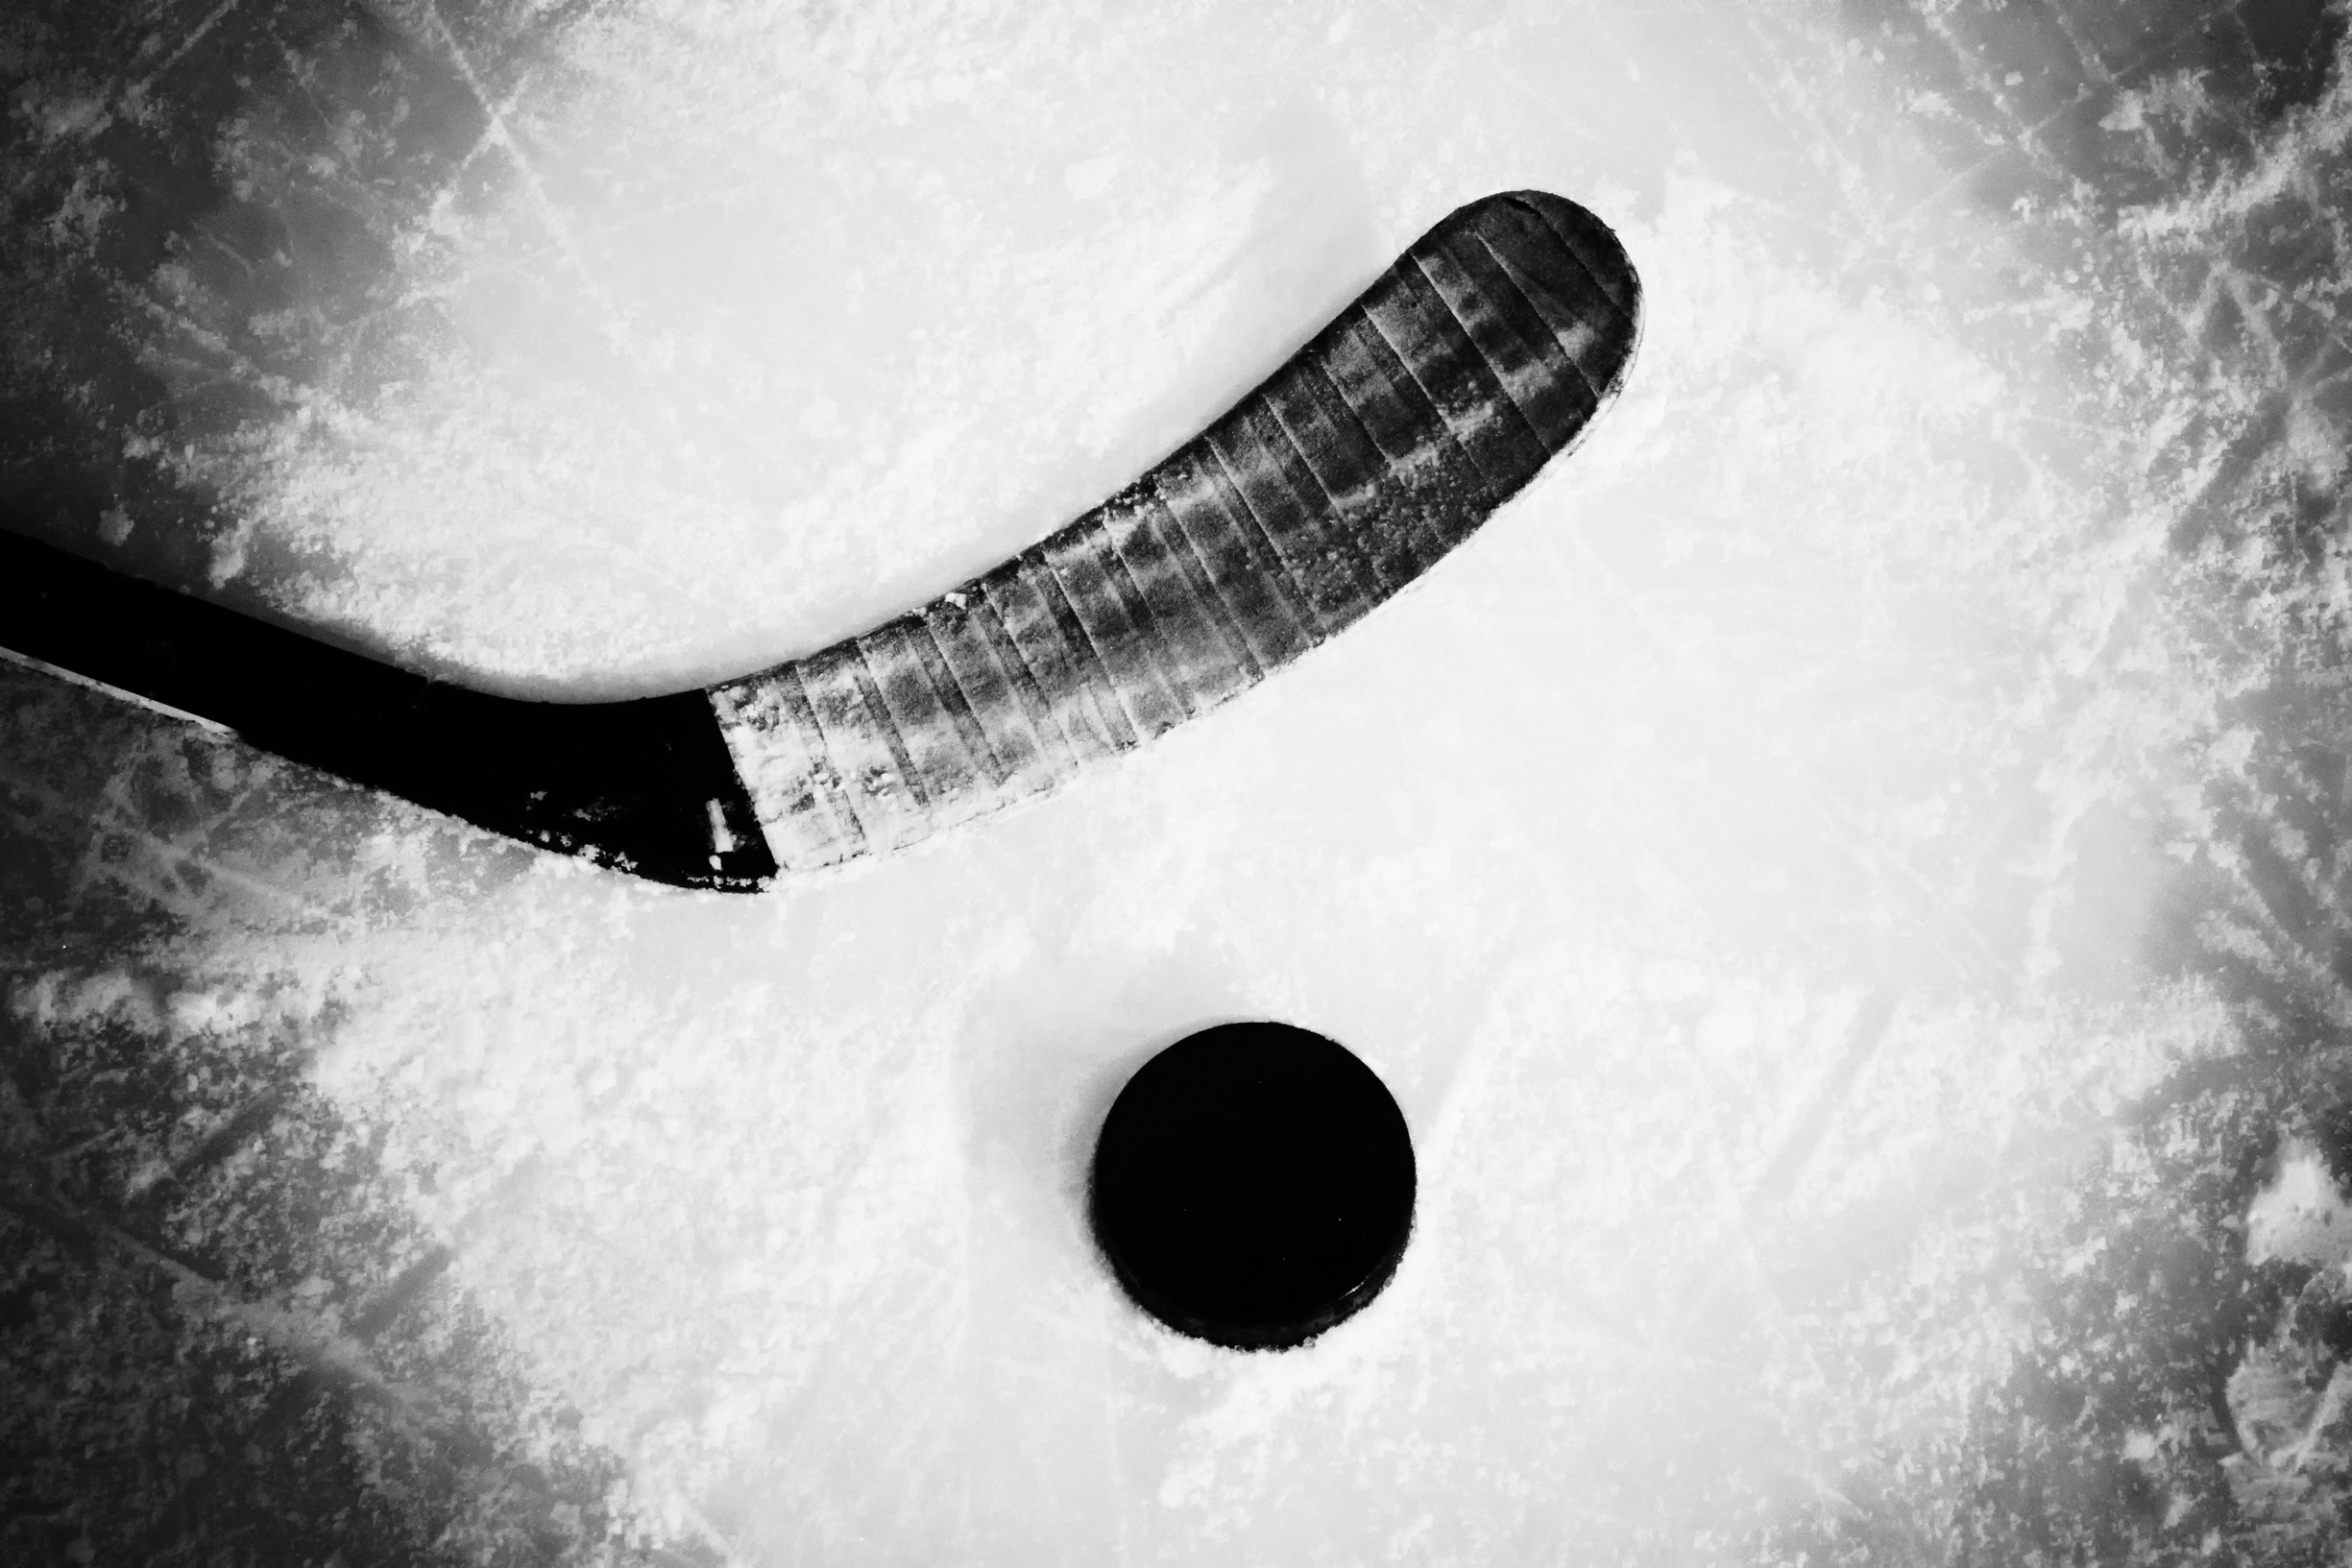 Ice hockey HD wallpapers, Frozen arena atmosphere, Powerful shots on goal, Skillful players, 2450x1640 HD Desktop